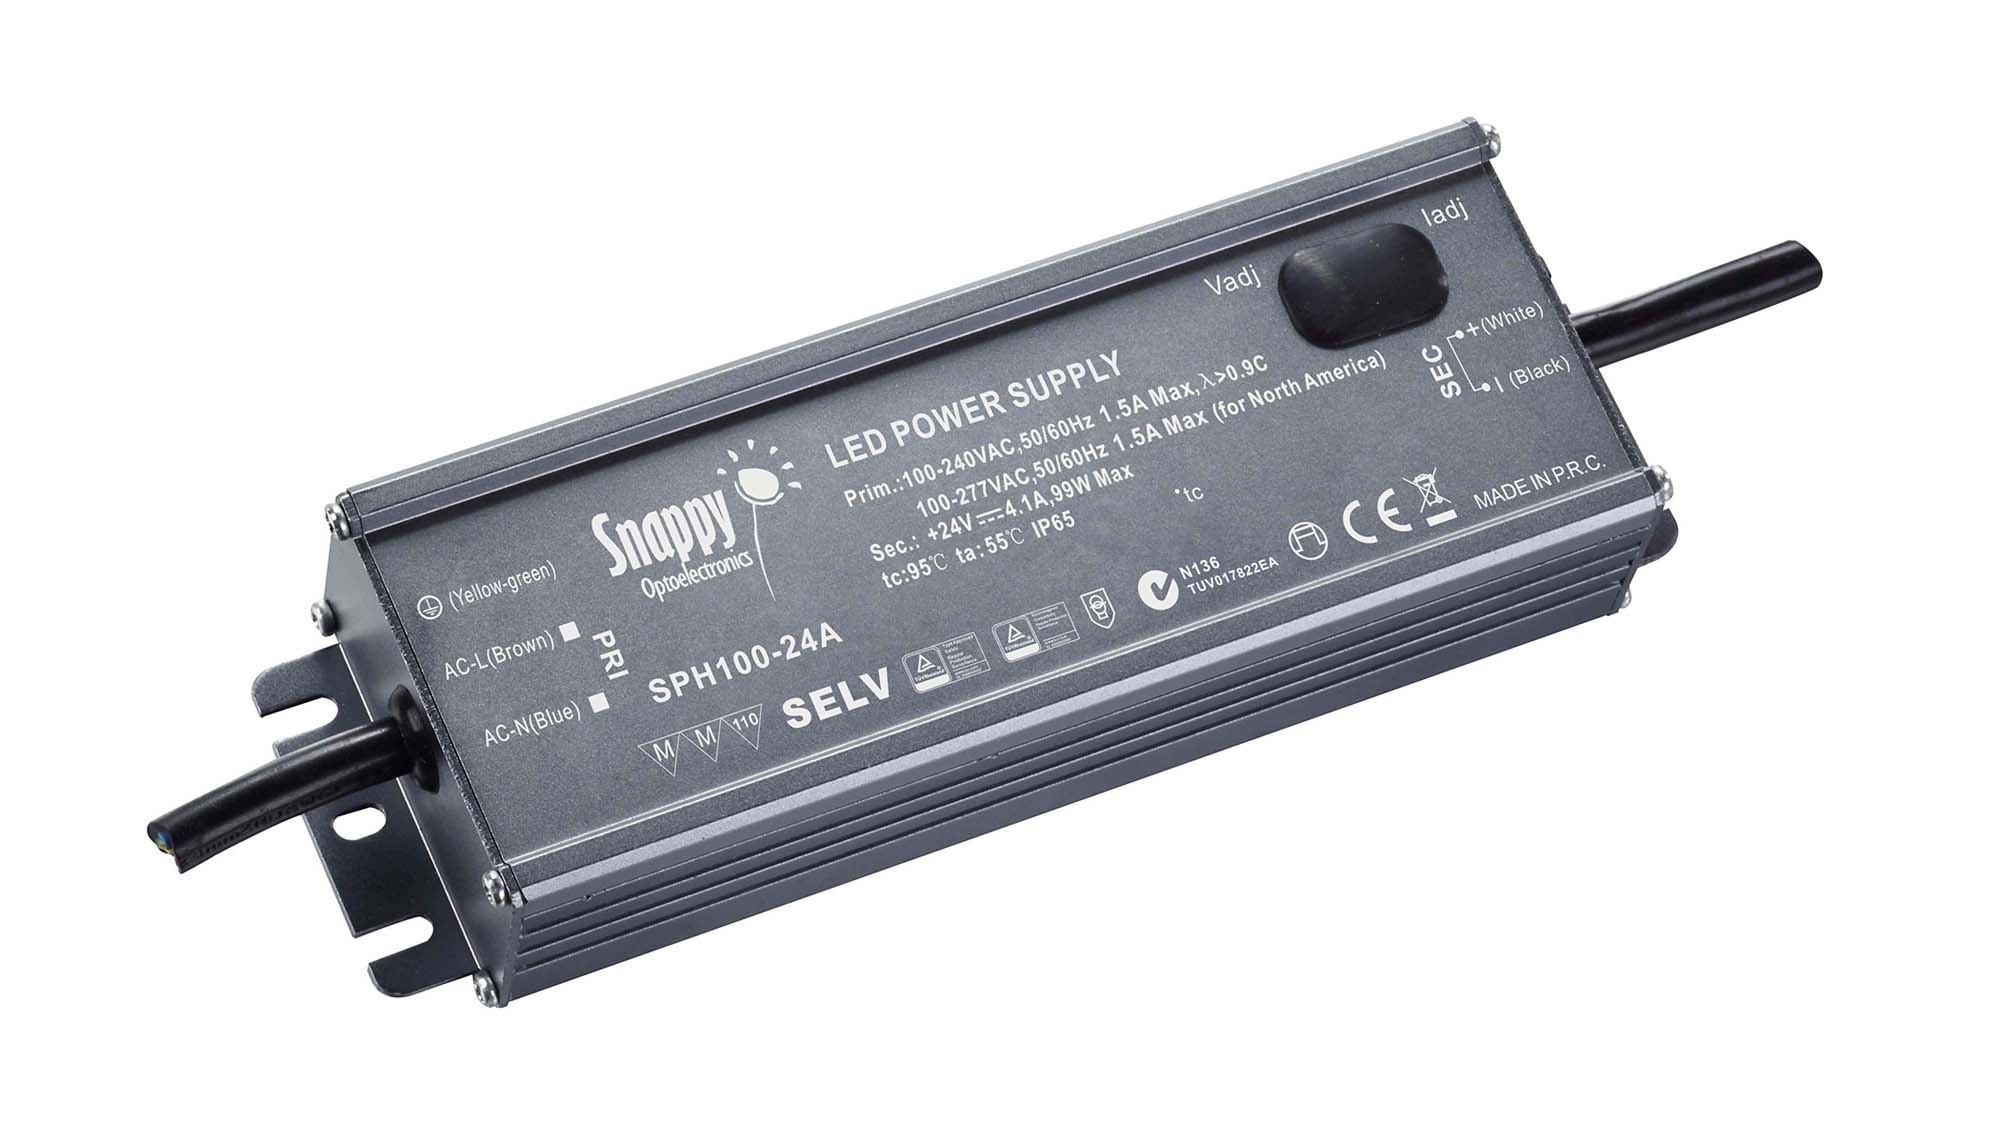 SPH100-24A  100W CV & CC Non-Dimmable LED Driver 24VDC IP65